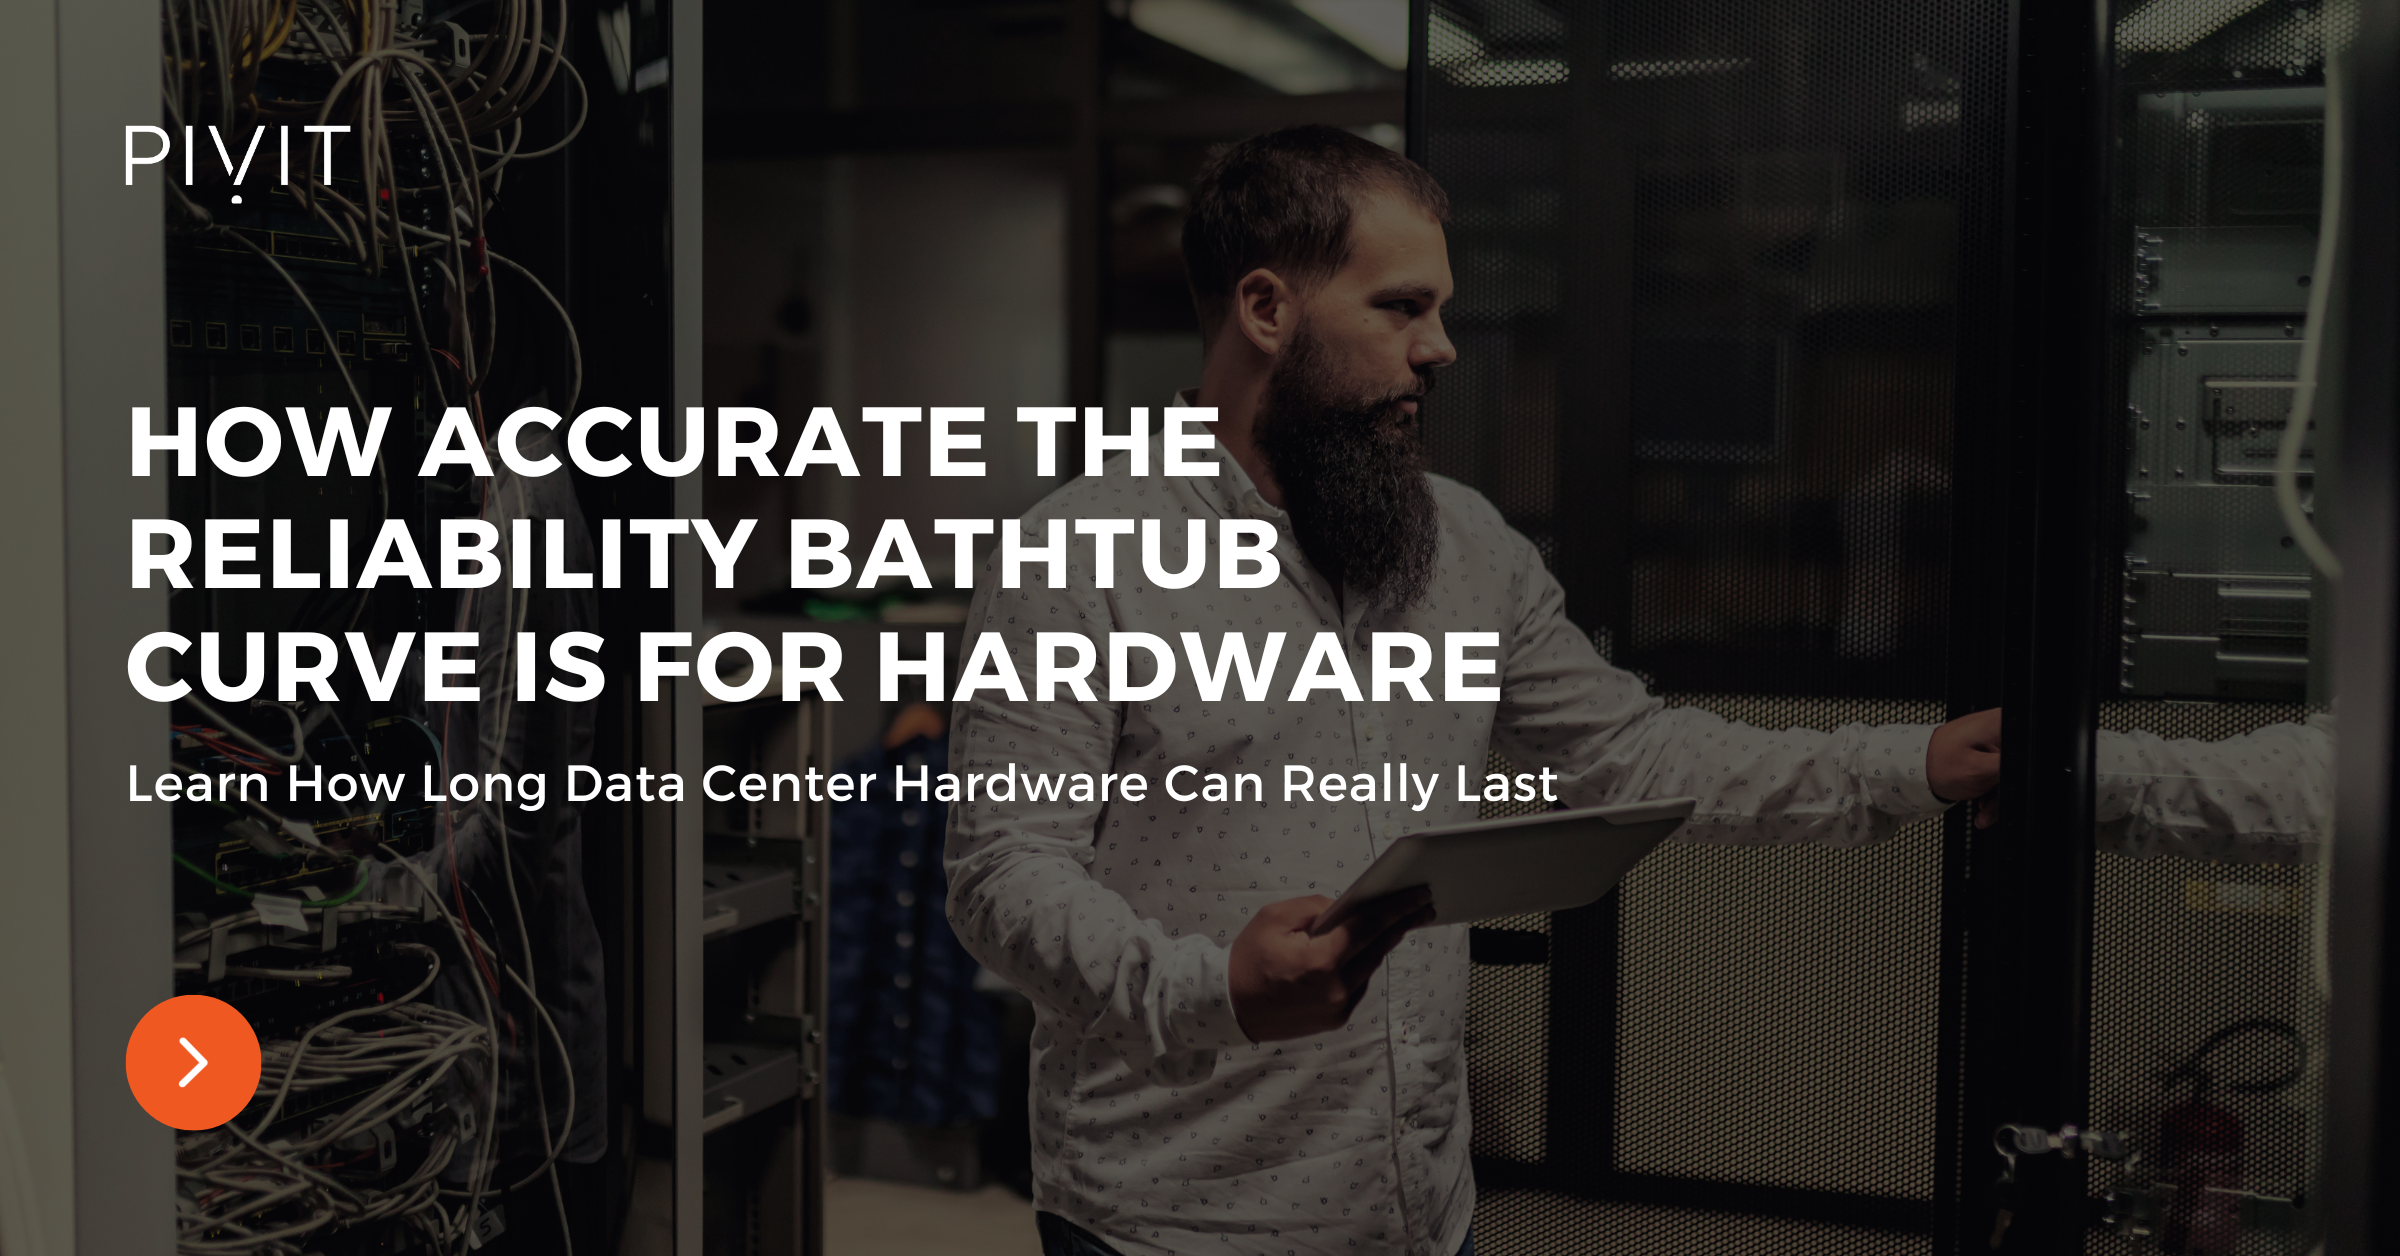 How Accurate the Reliability Bathtub Curve Is for Hardware - Learn How Long Data Center Hardware Can Really Last